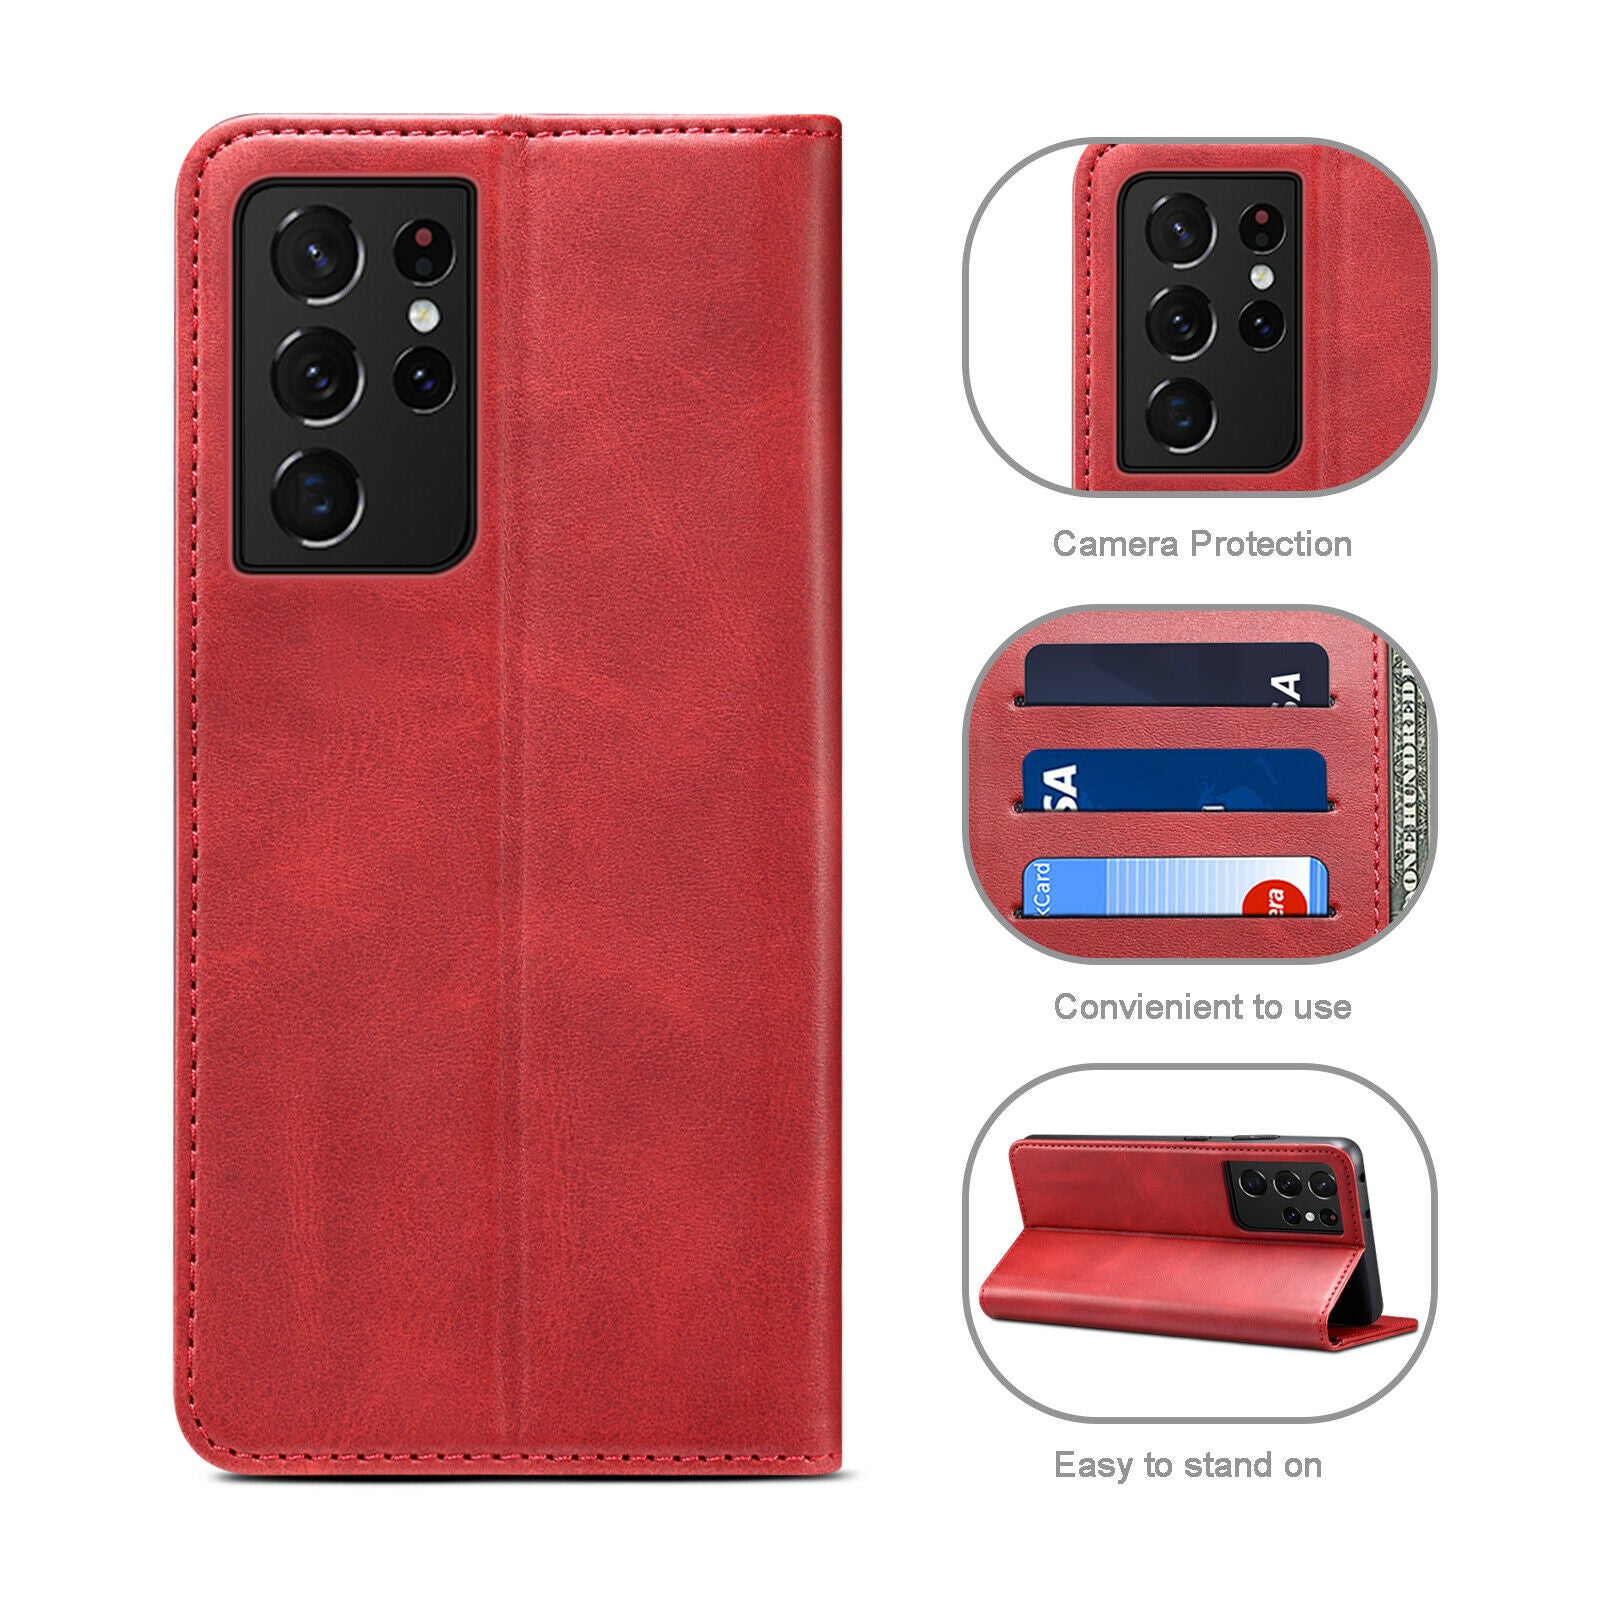 Flip Leather Card Wallet Case for Samsung Galaxy series - carolay.co